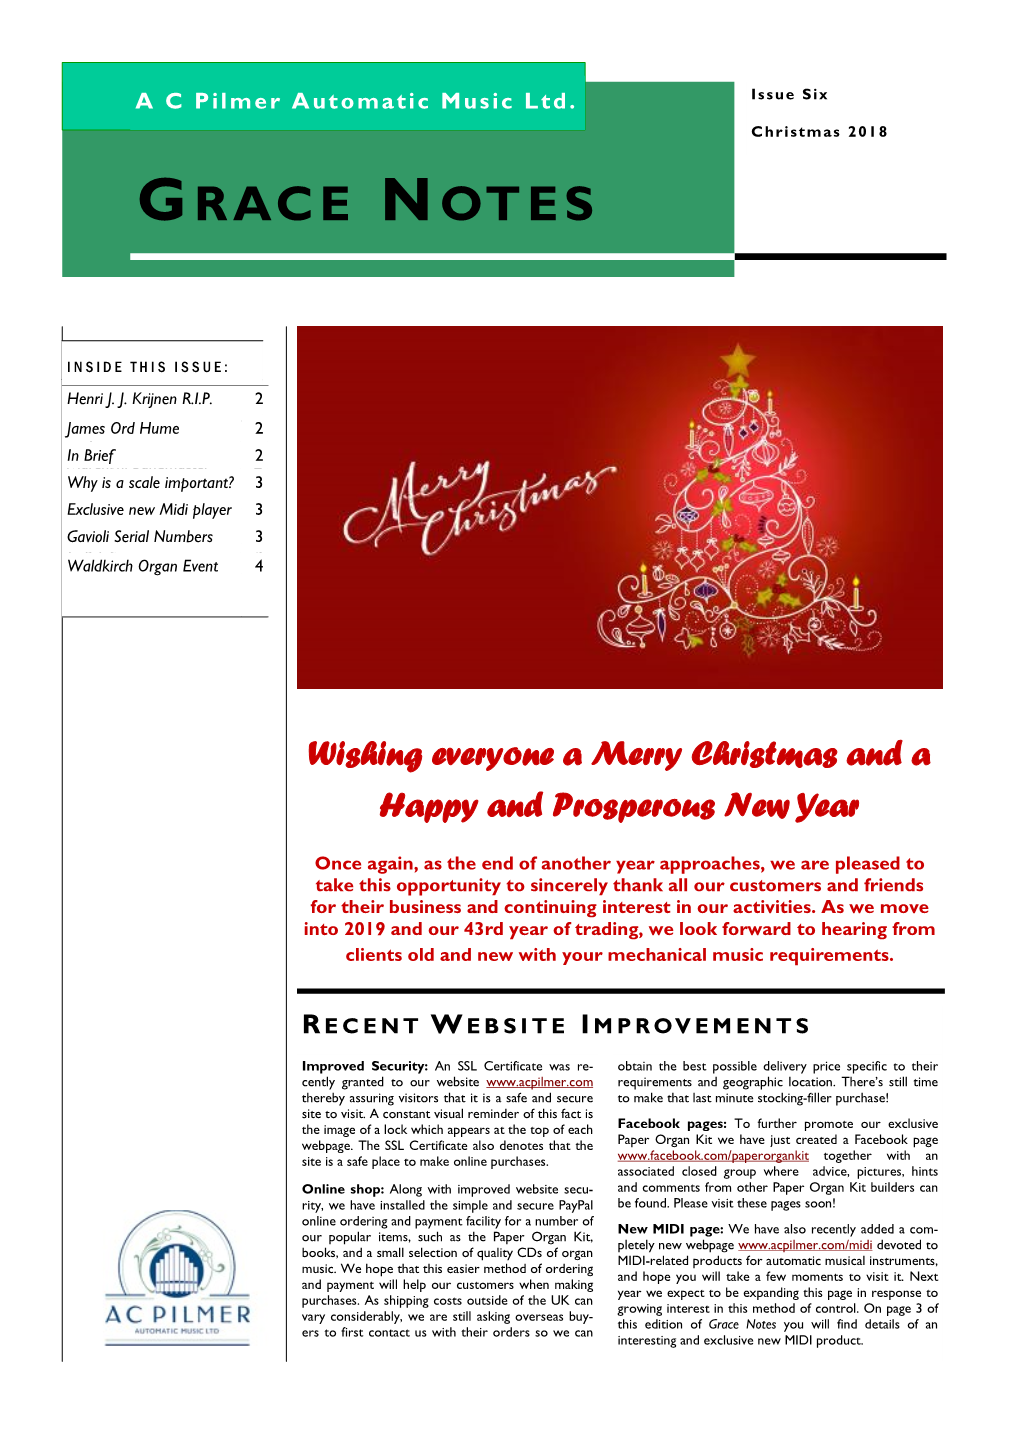 Issue 6 – Christmas 2018